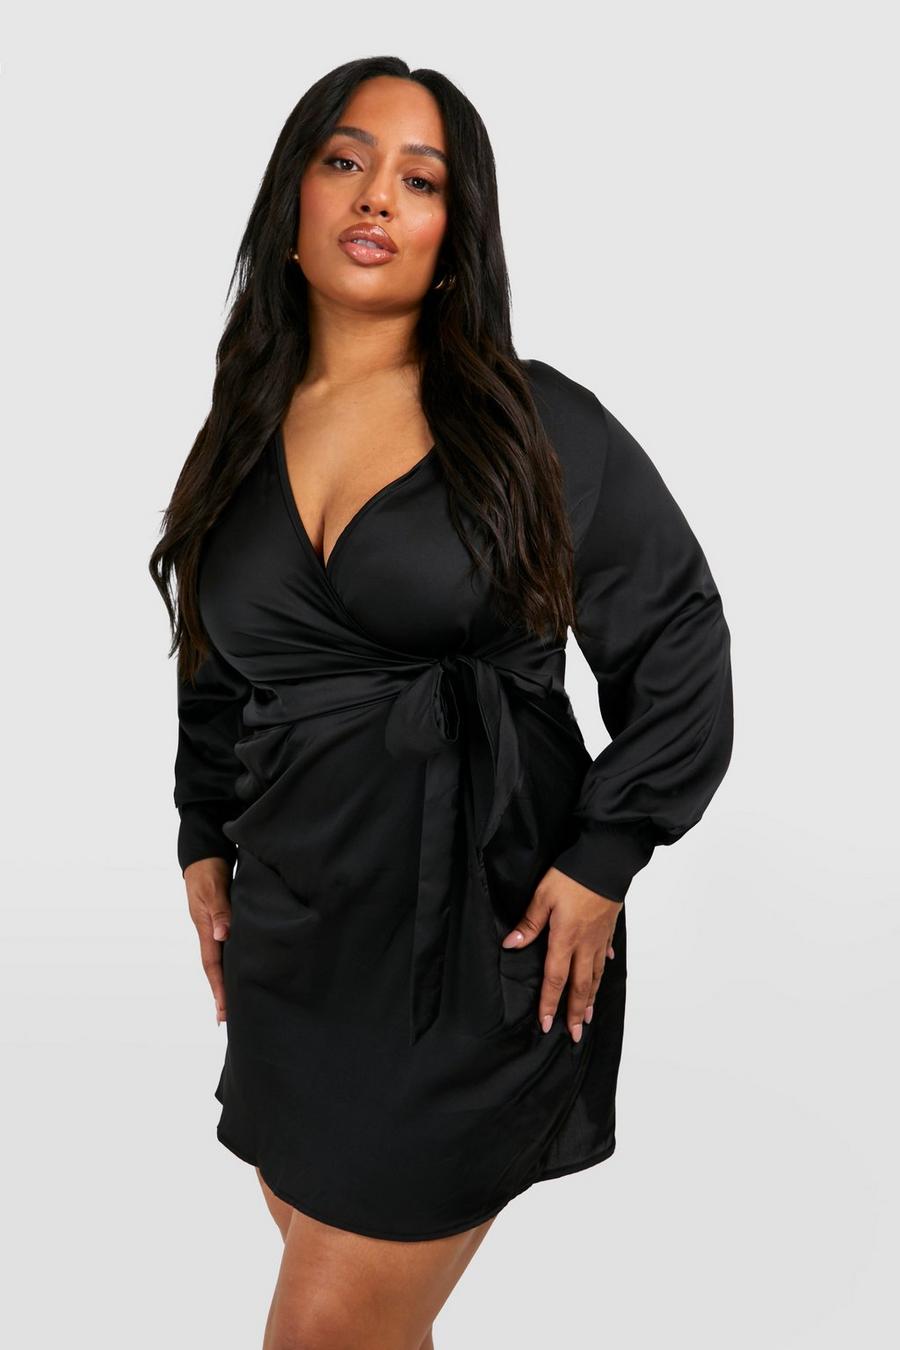 Plus Size Going Out Outfits